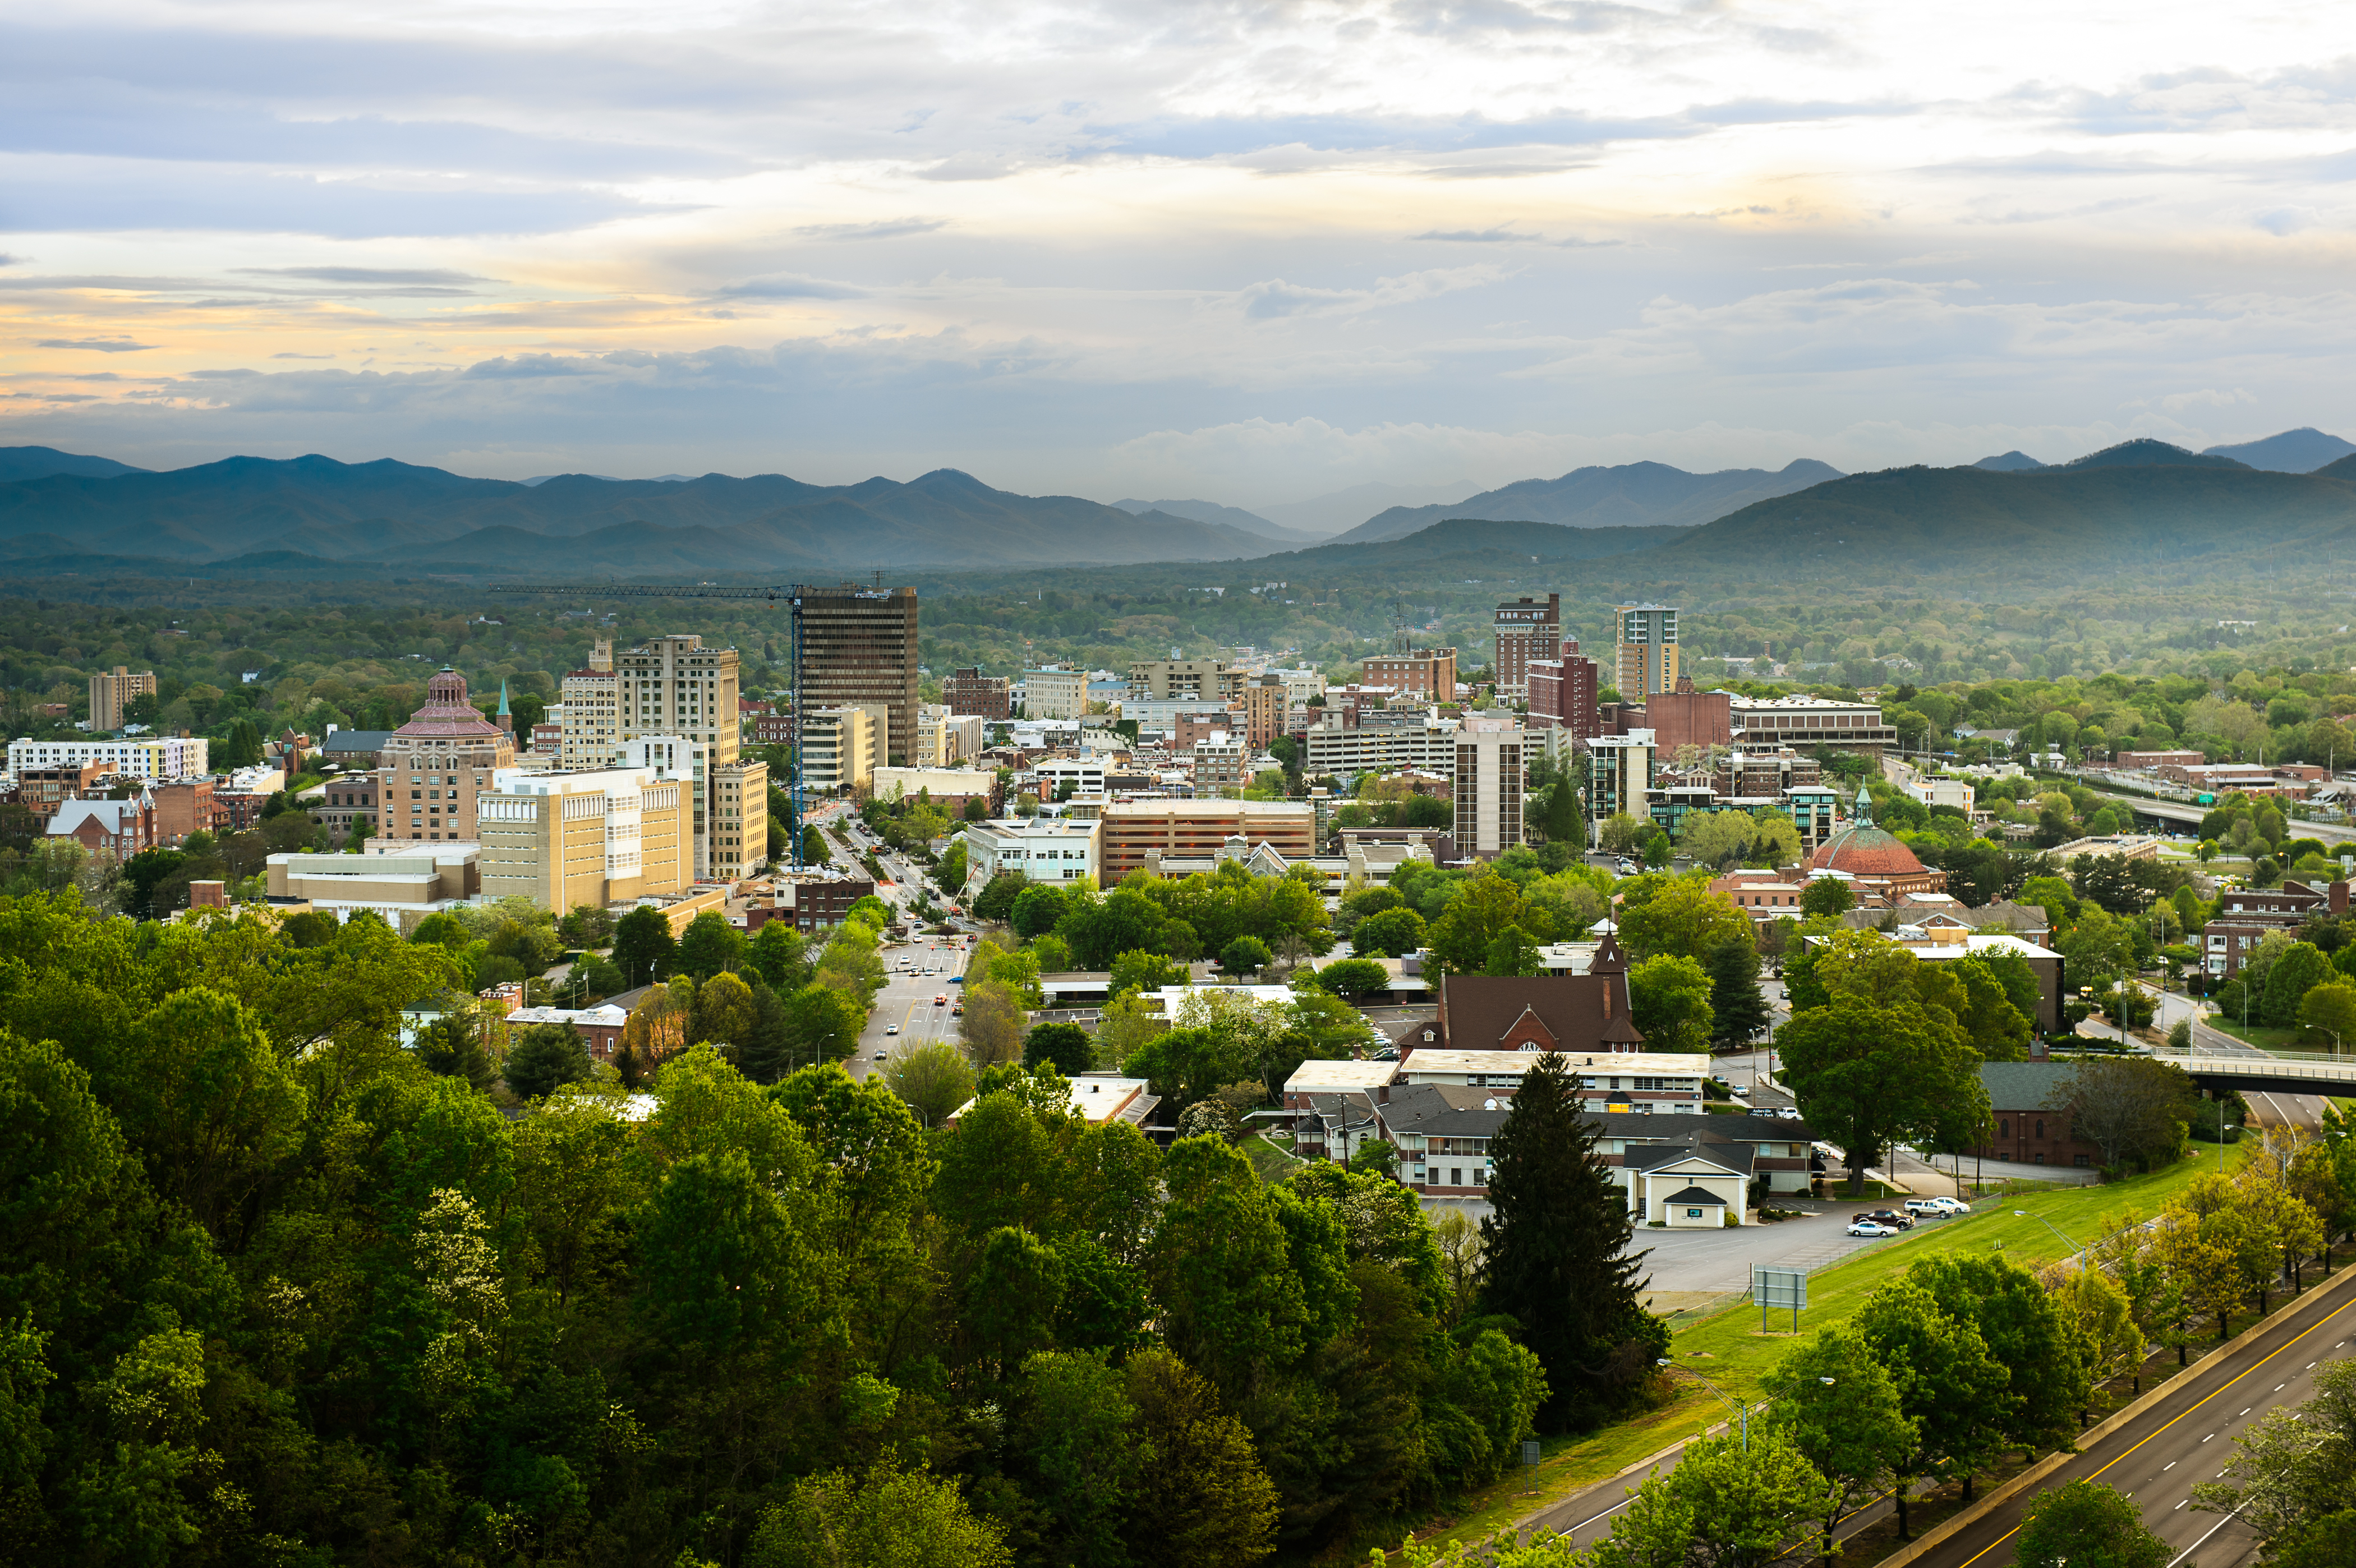 Aerial view of Asheville with mountains in background